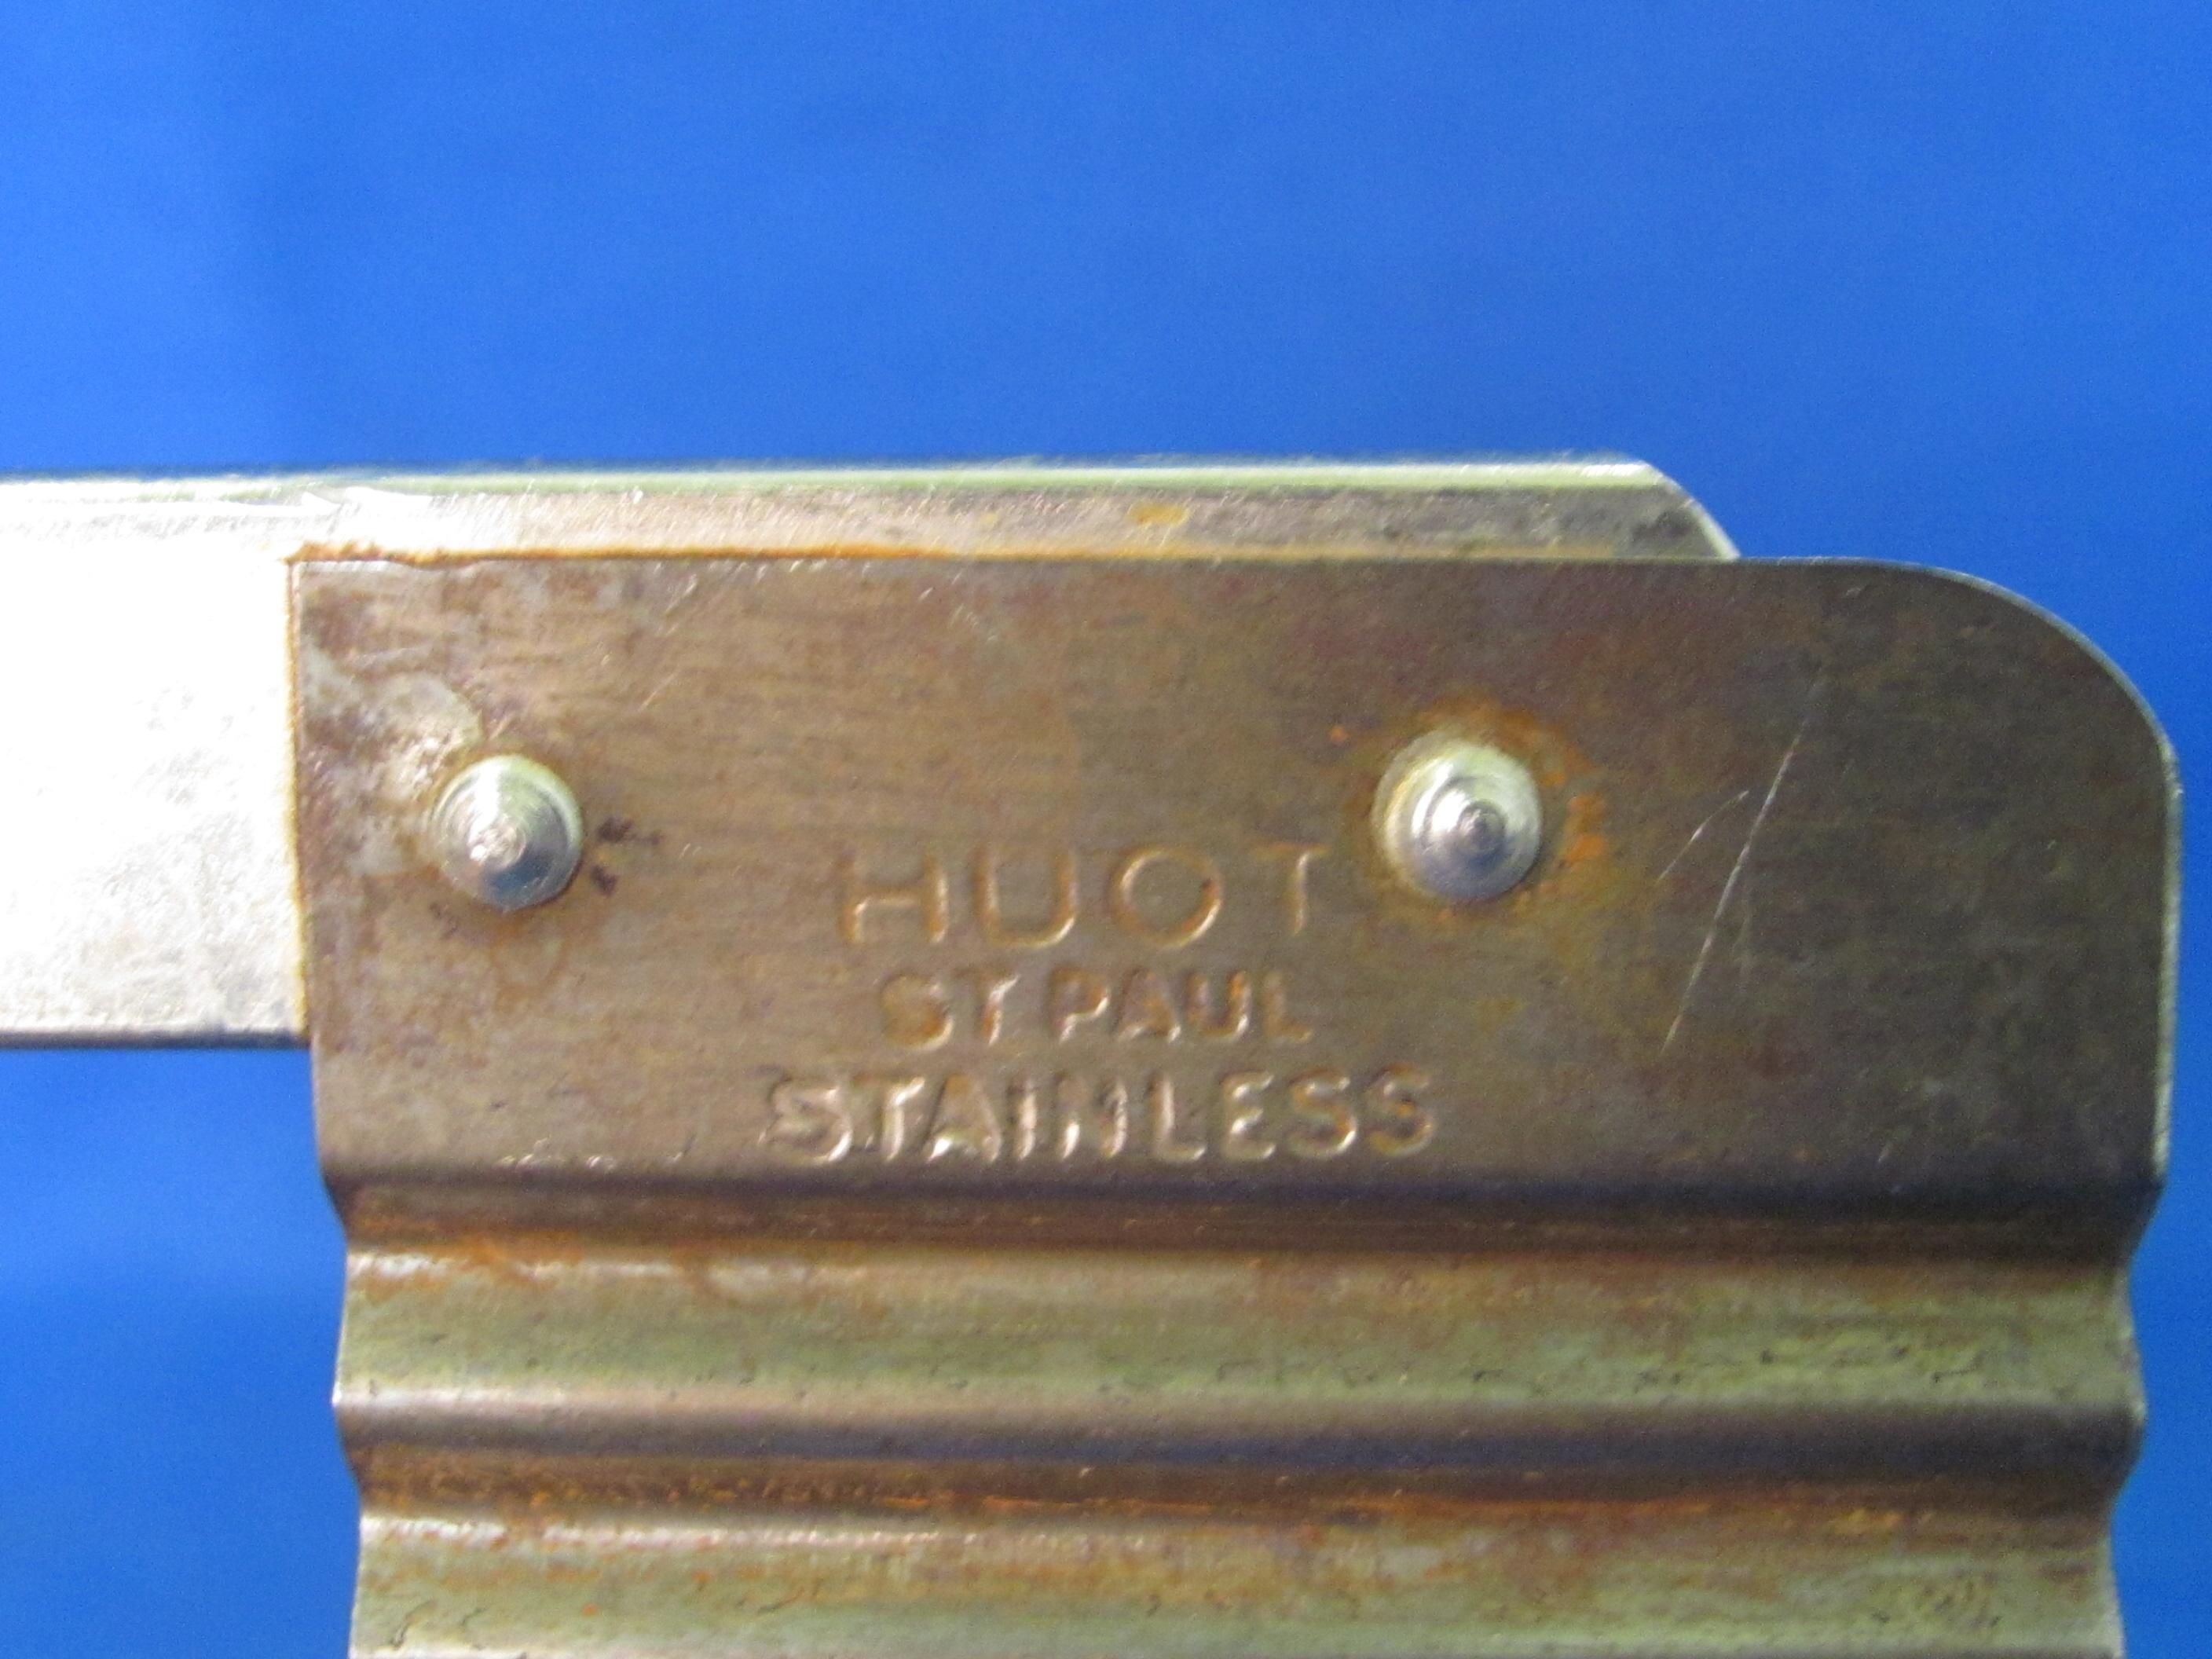 Huot Food Chopper – Stainless Steel – Made in St. Paul, MN. - 7 1/8” wide